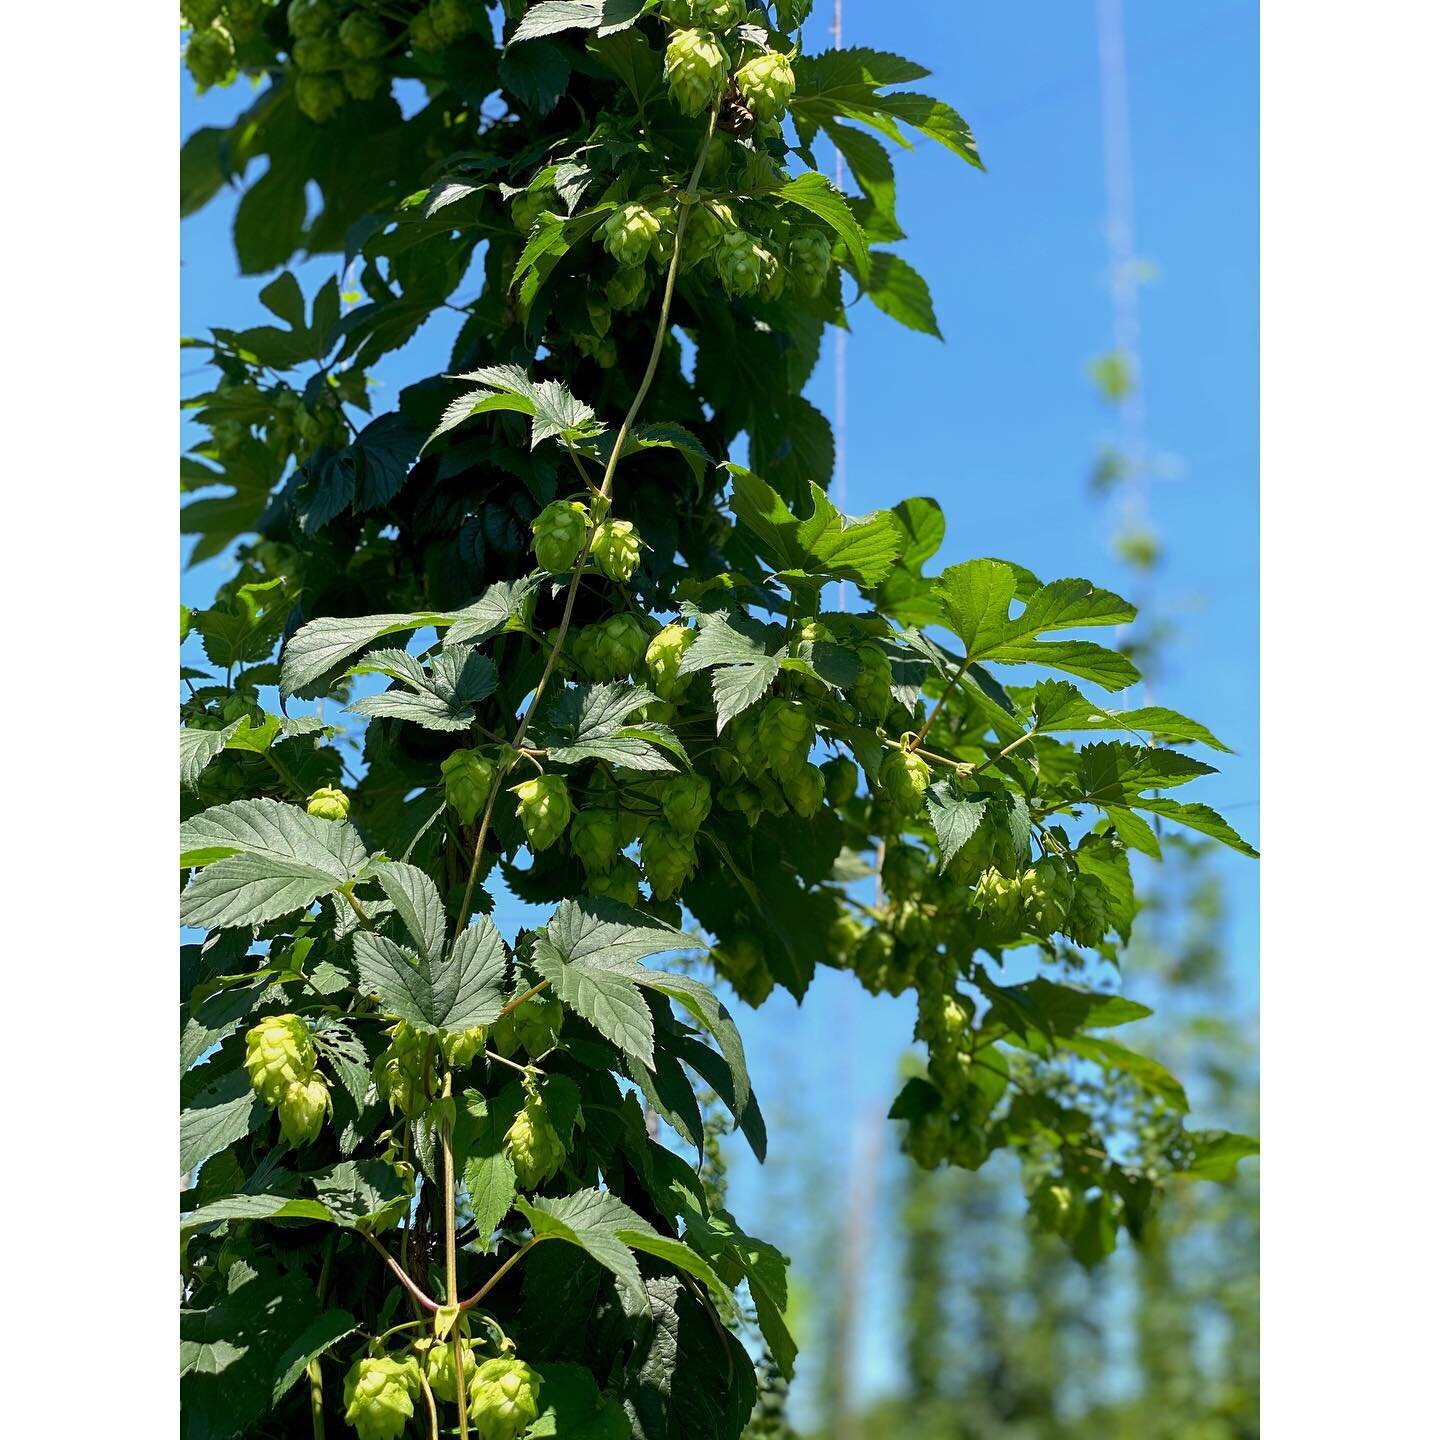 It&rsquo;s amazing the difference a few weeks can make! Swipe to see the progress 🌱 

The hops are coming in nicely and harvest is quickly approaching. Reach out via Instagram or email to place an order of our Jersey Fresh hops!
.
.
.
#skyhighhops #